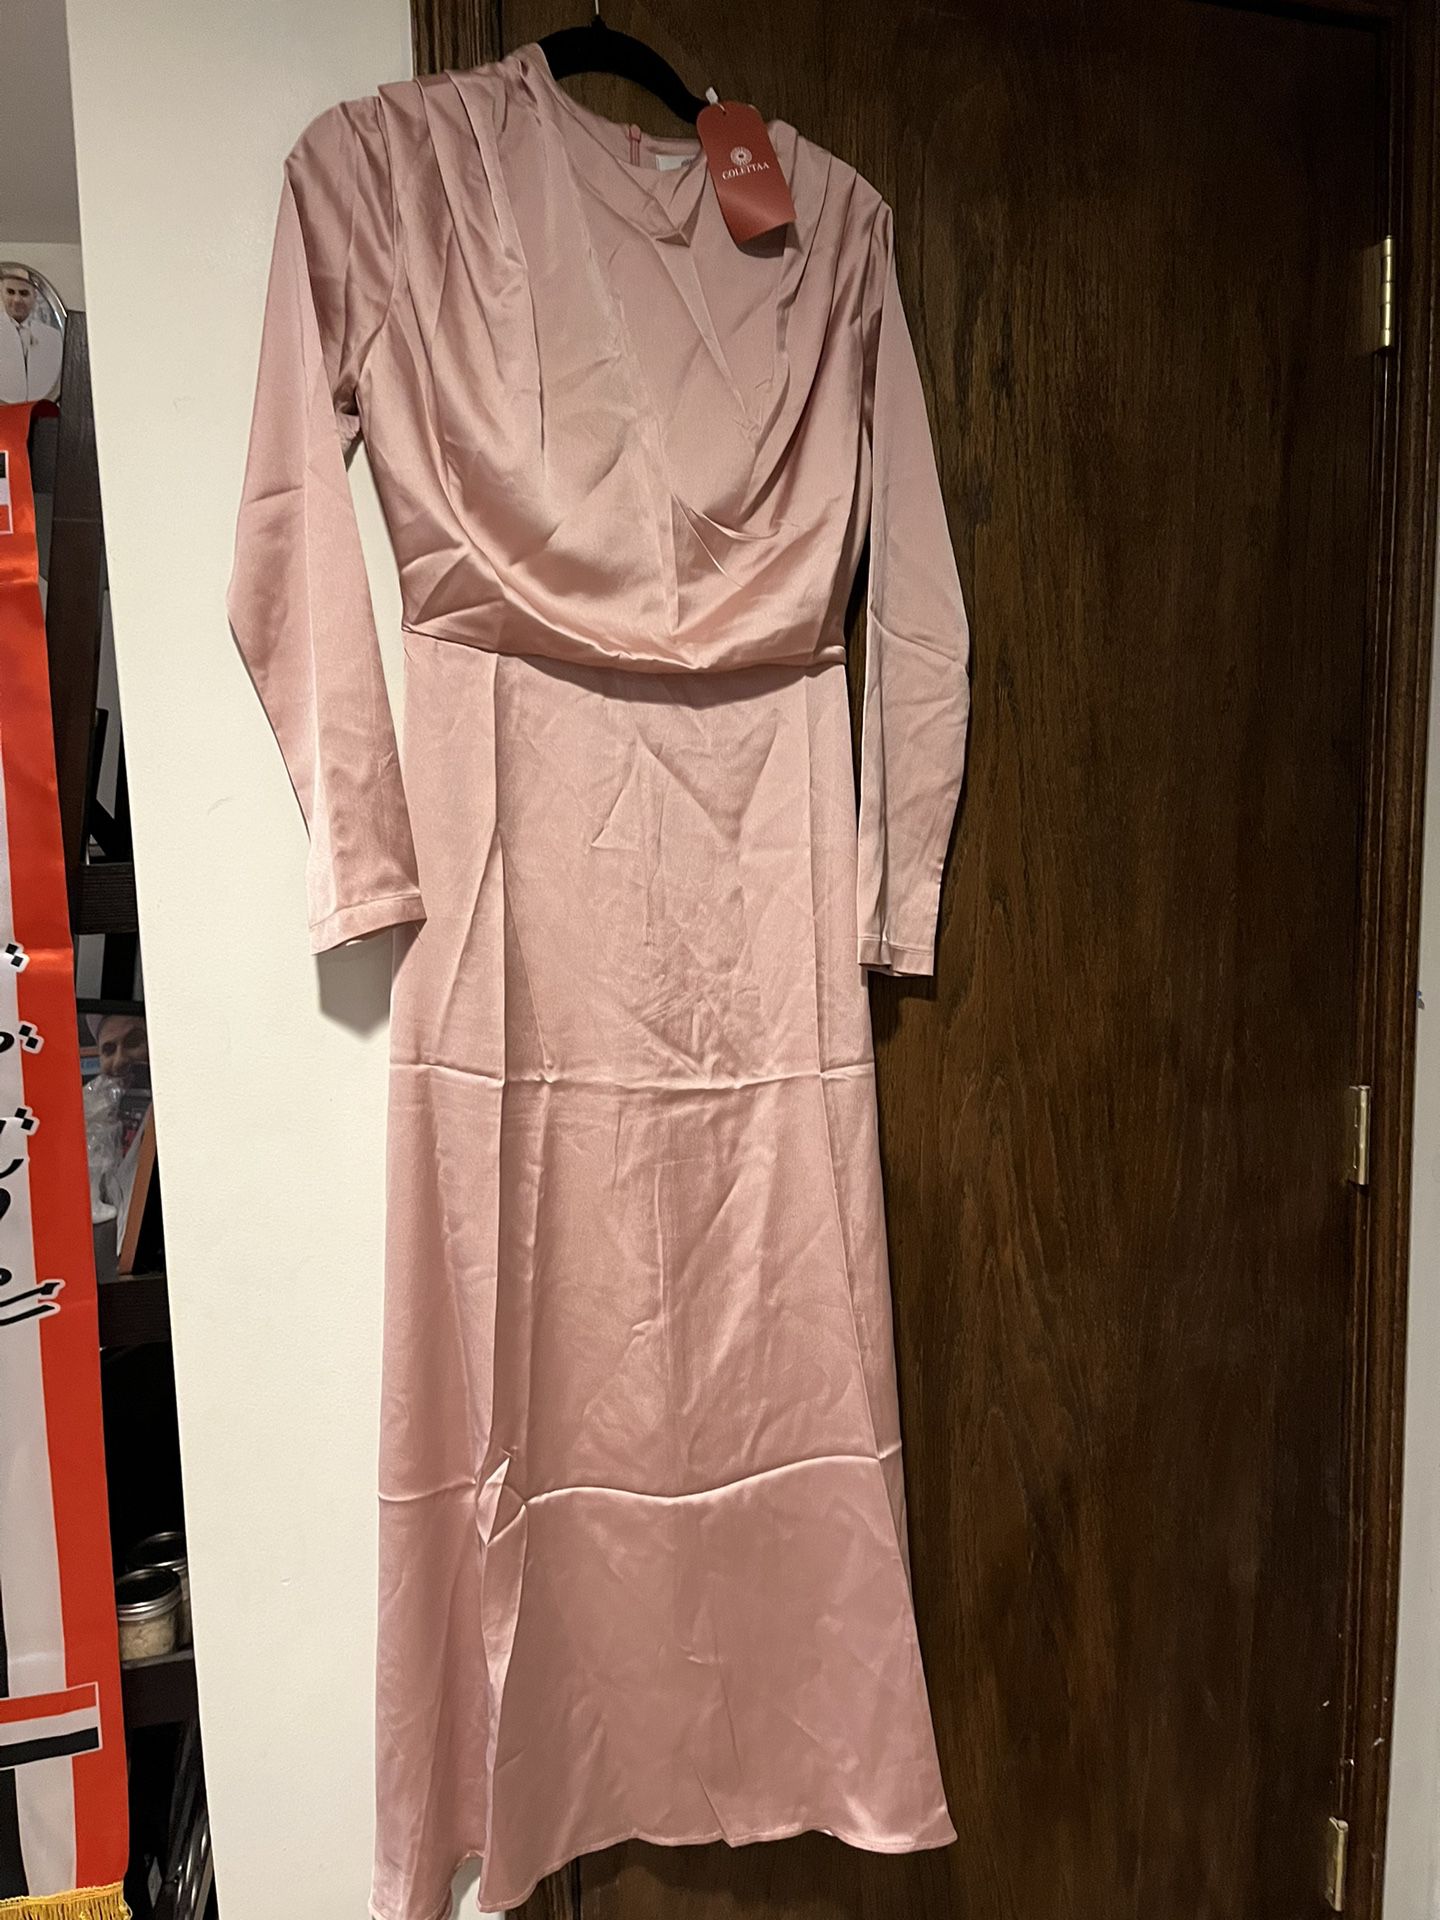 NWT Blush Pink Satin Dress Long Sleeve Maxi Available In Xl (12), L (10) And S